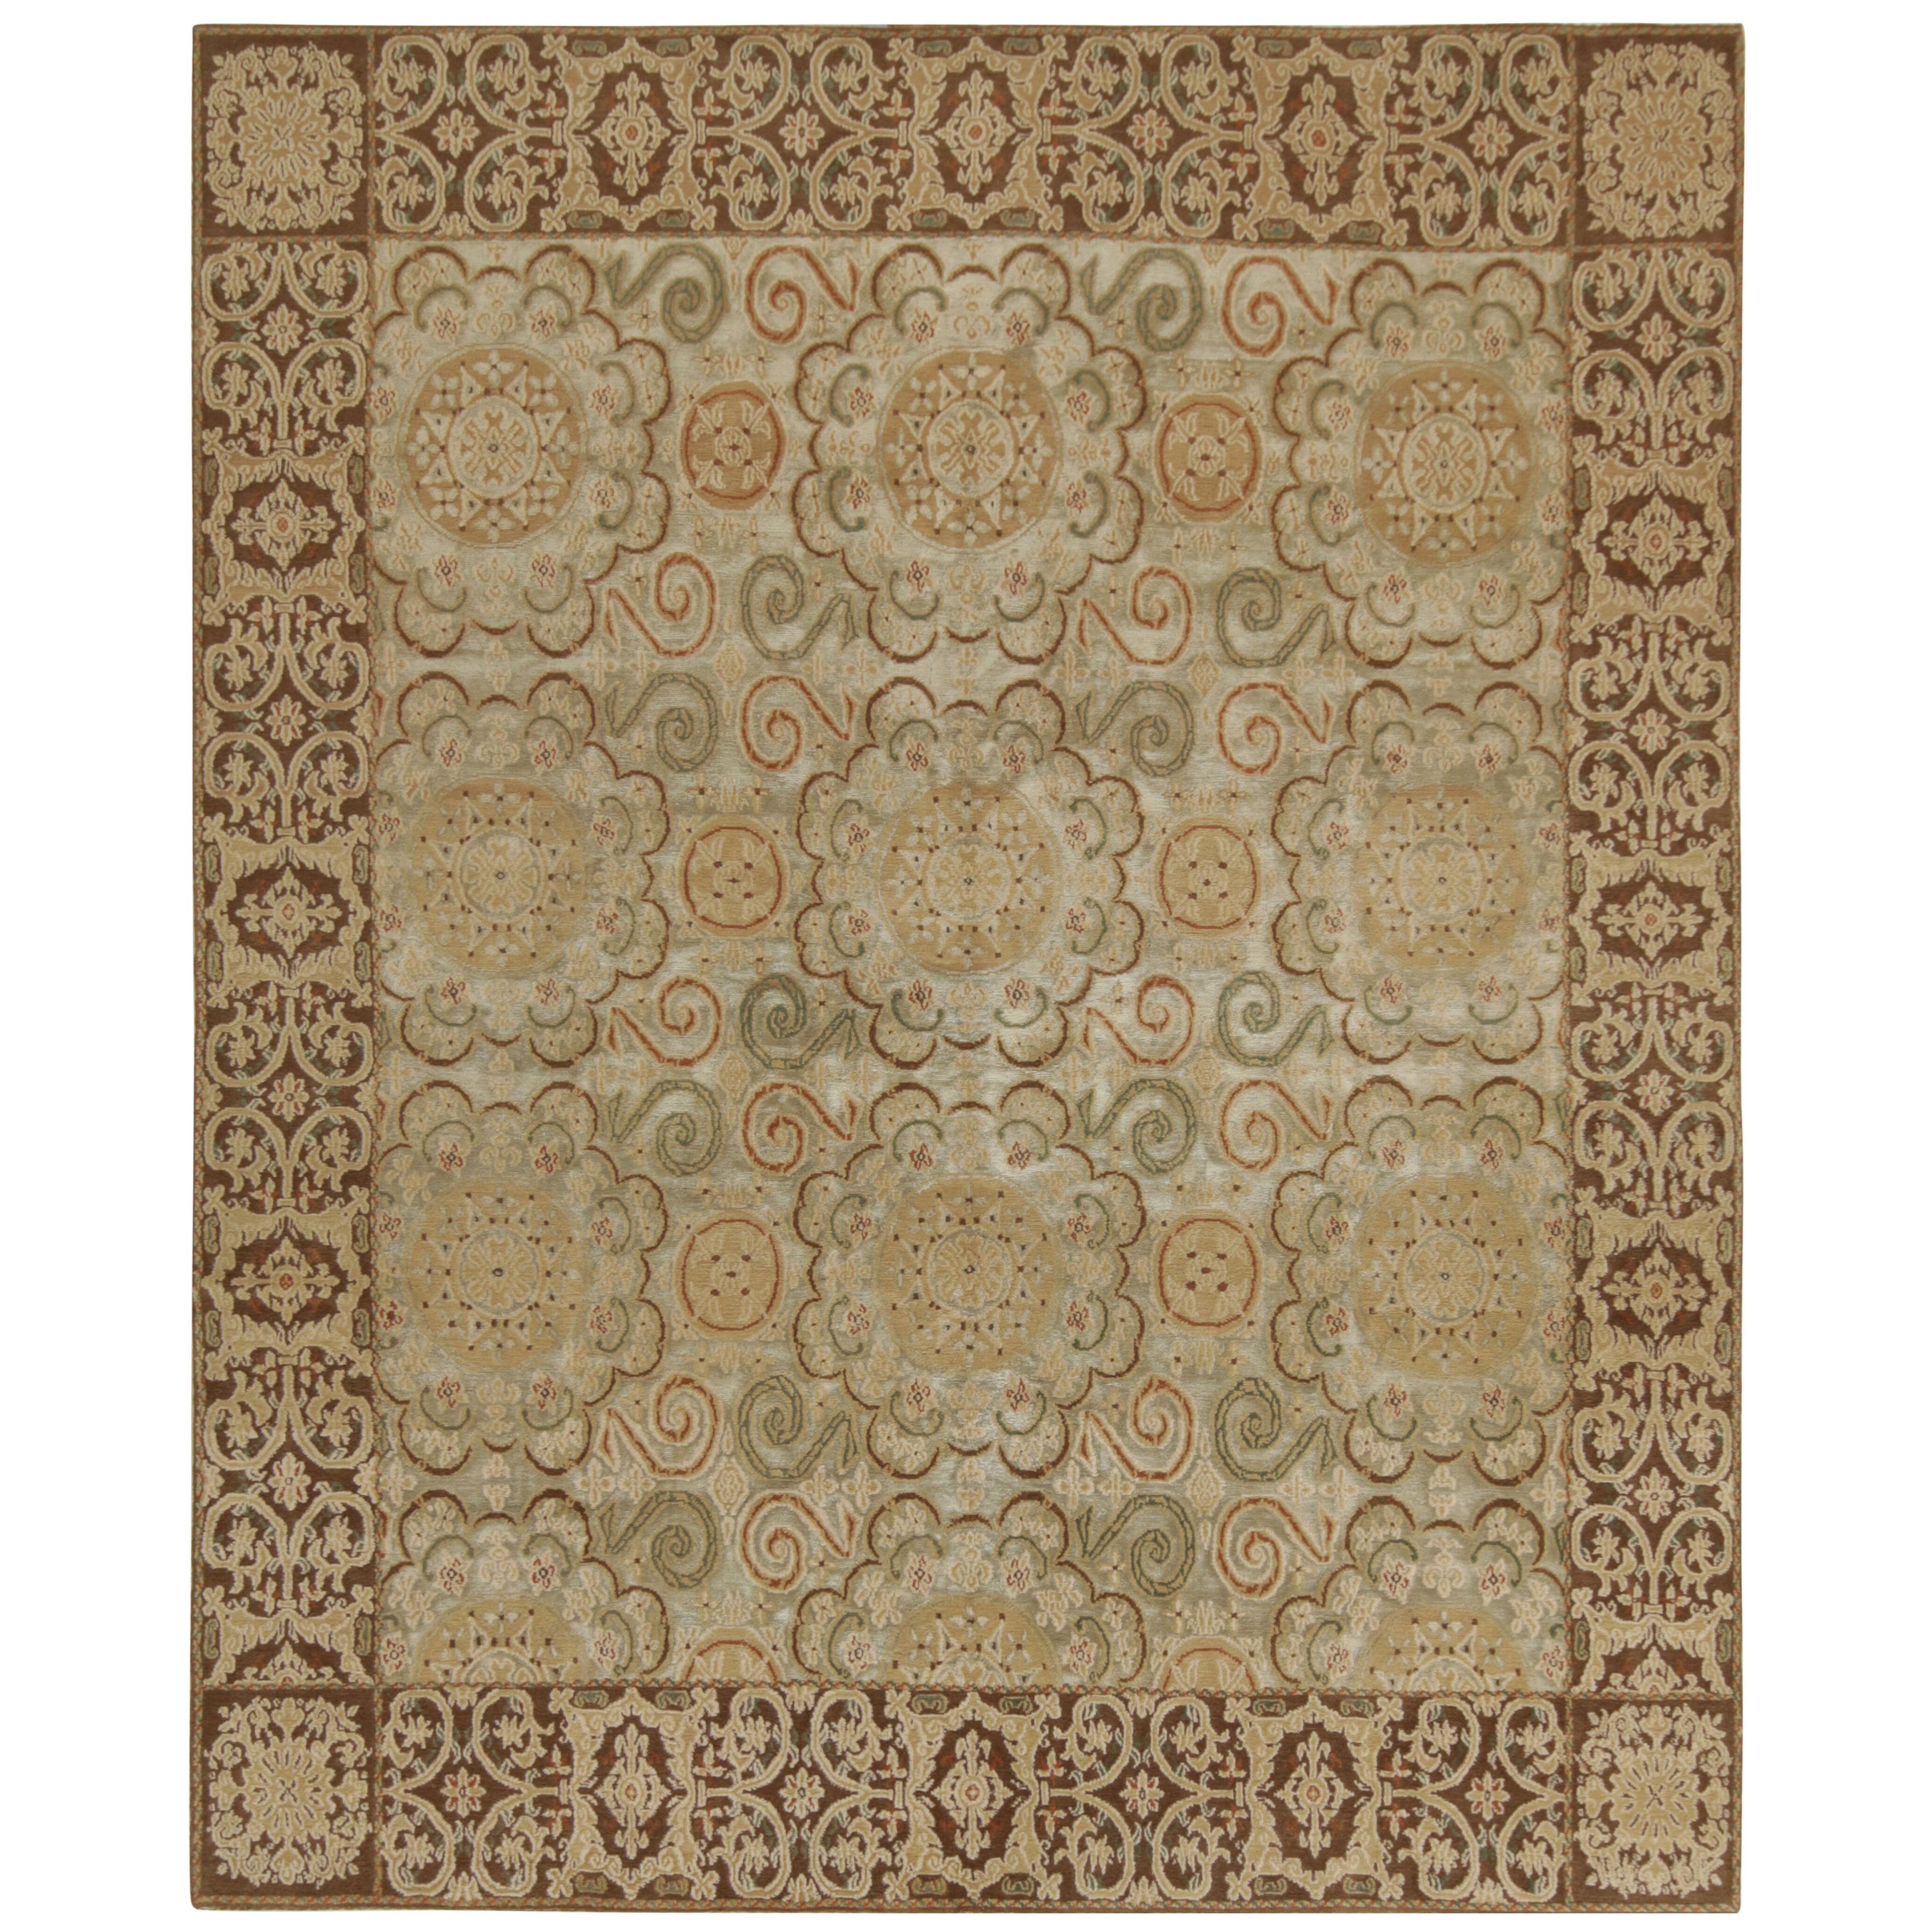 Rug & Kilim’s European Art Nouveau Style Rug In Beige, Brown And Green Patterns